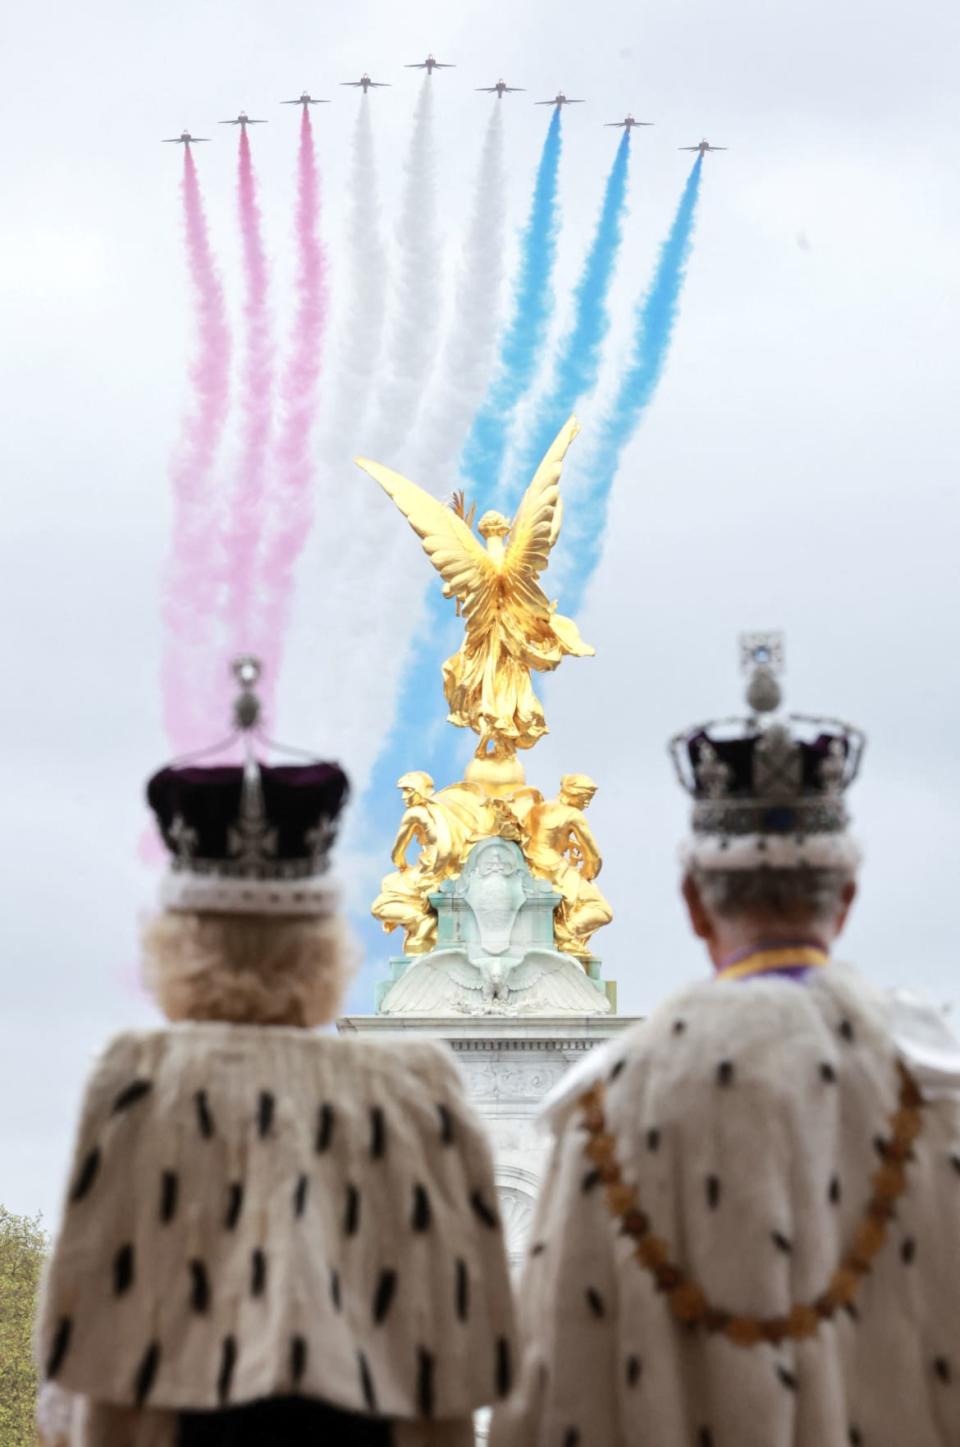 <div class="inline-image__caption"><p>A handout image released by Buckingham Palace showing Britain's King Charles III and Queen Camilla as they watch the flypast from the balcony of Buckingham Palace after their coronation on May 6, 2023 in London, Britain.</p></div> <div class="inline-image__credit">Chris Jackson for Buckingham Palace/ Handout via REUTERS</div>